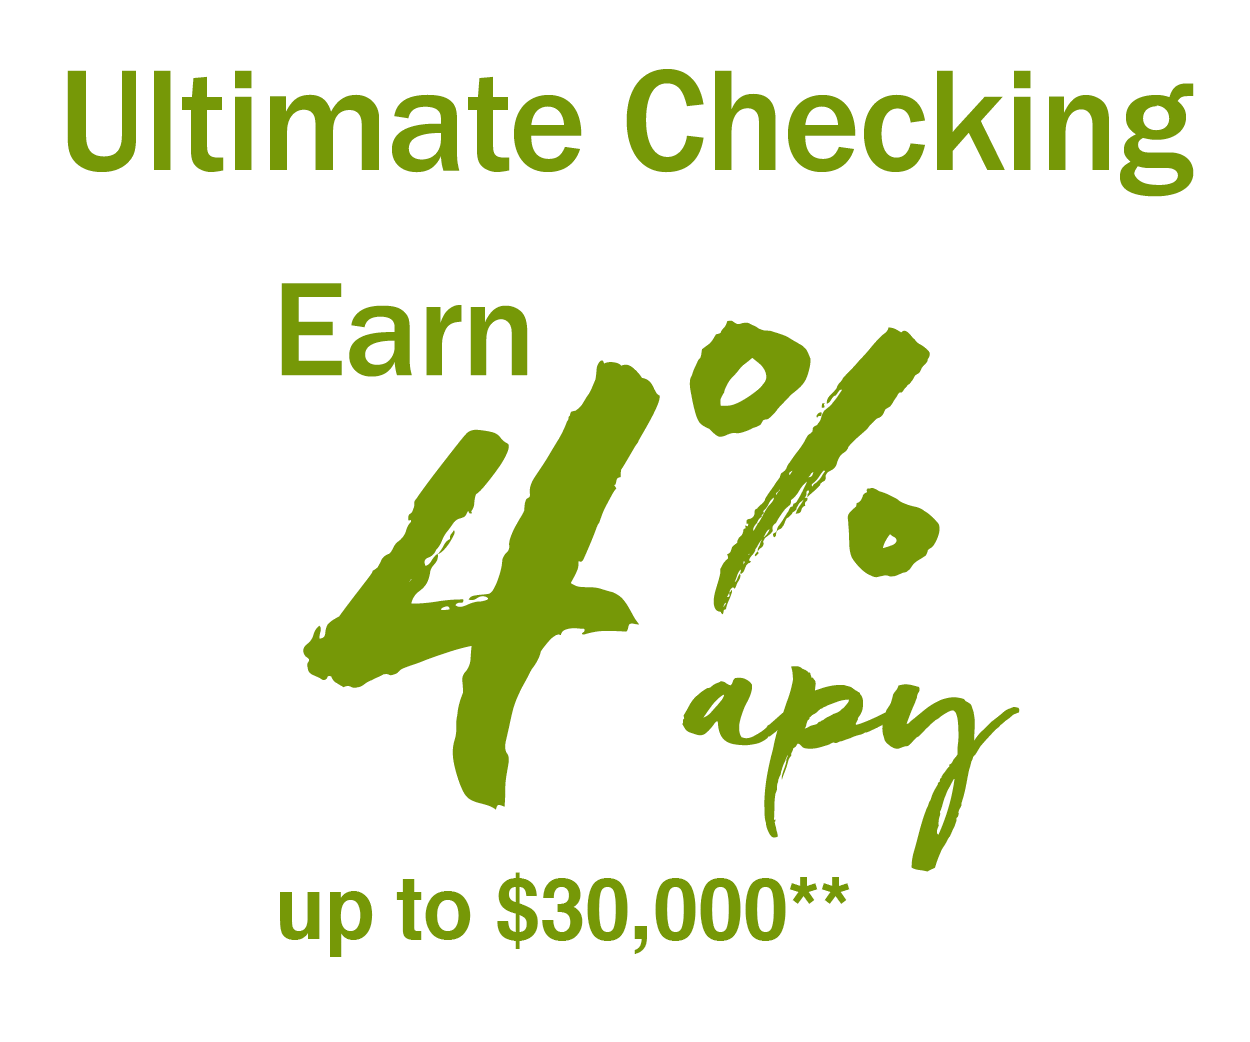 Ultimate Checking Earn 4% up to $30,000 **